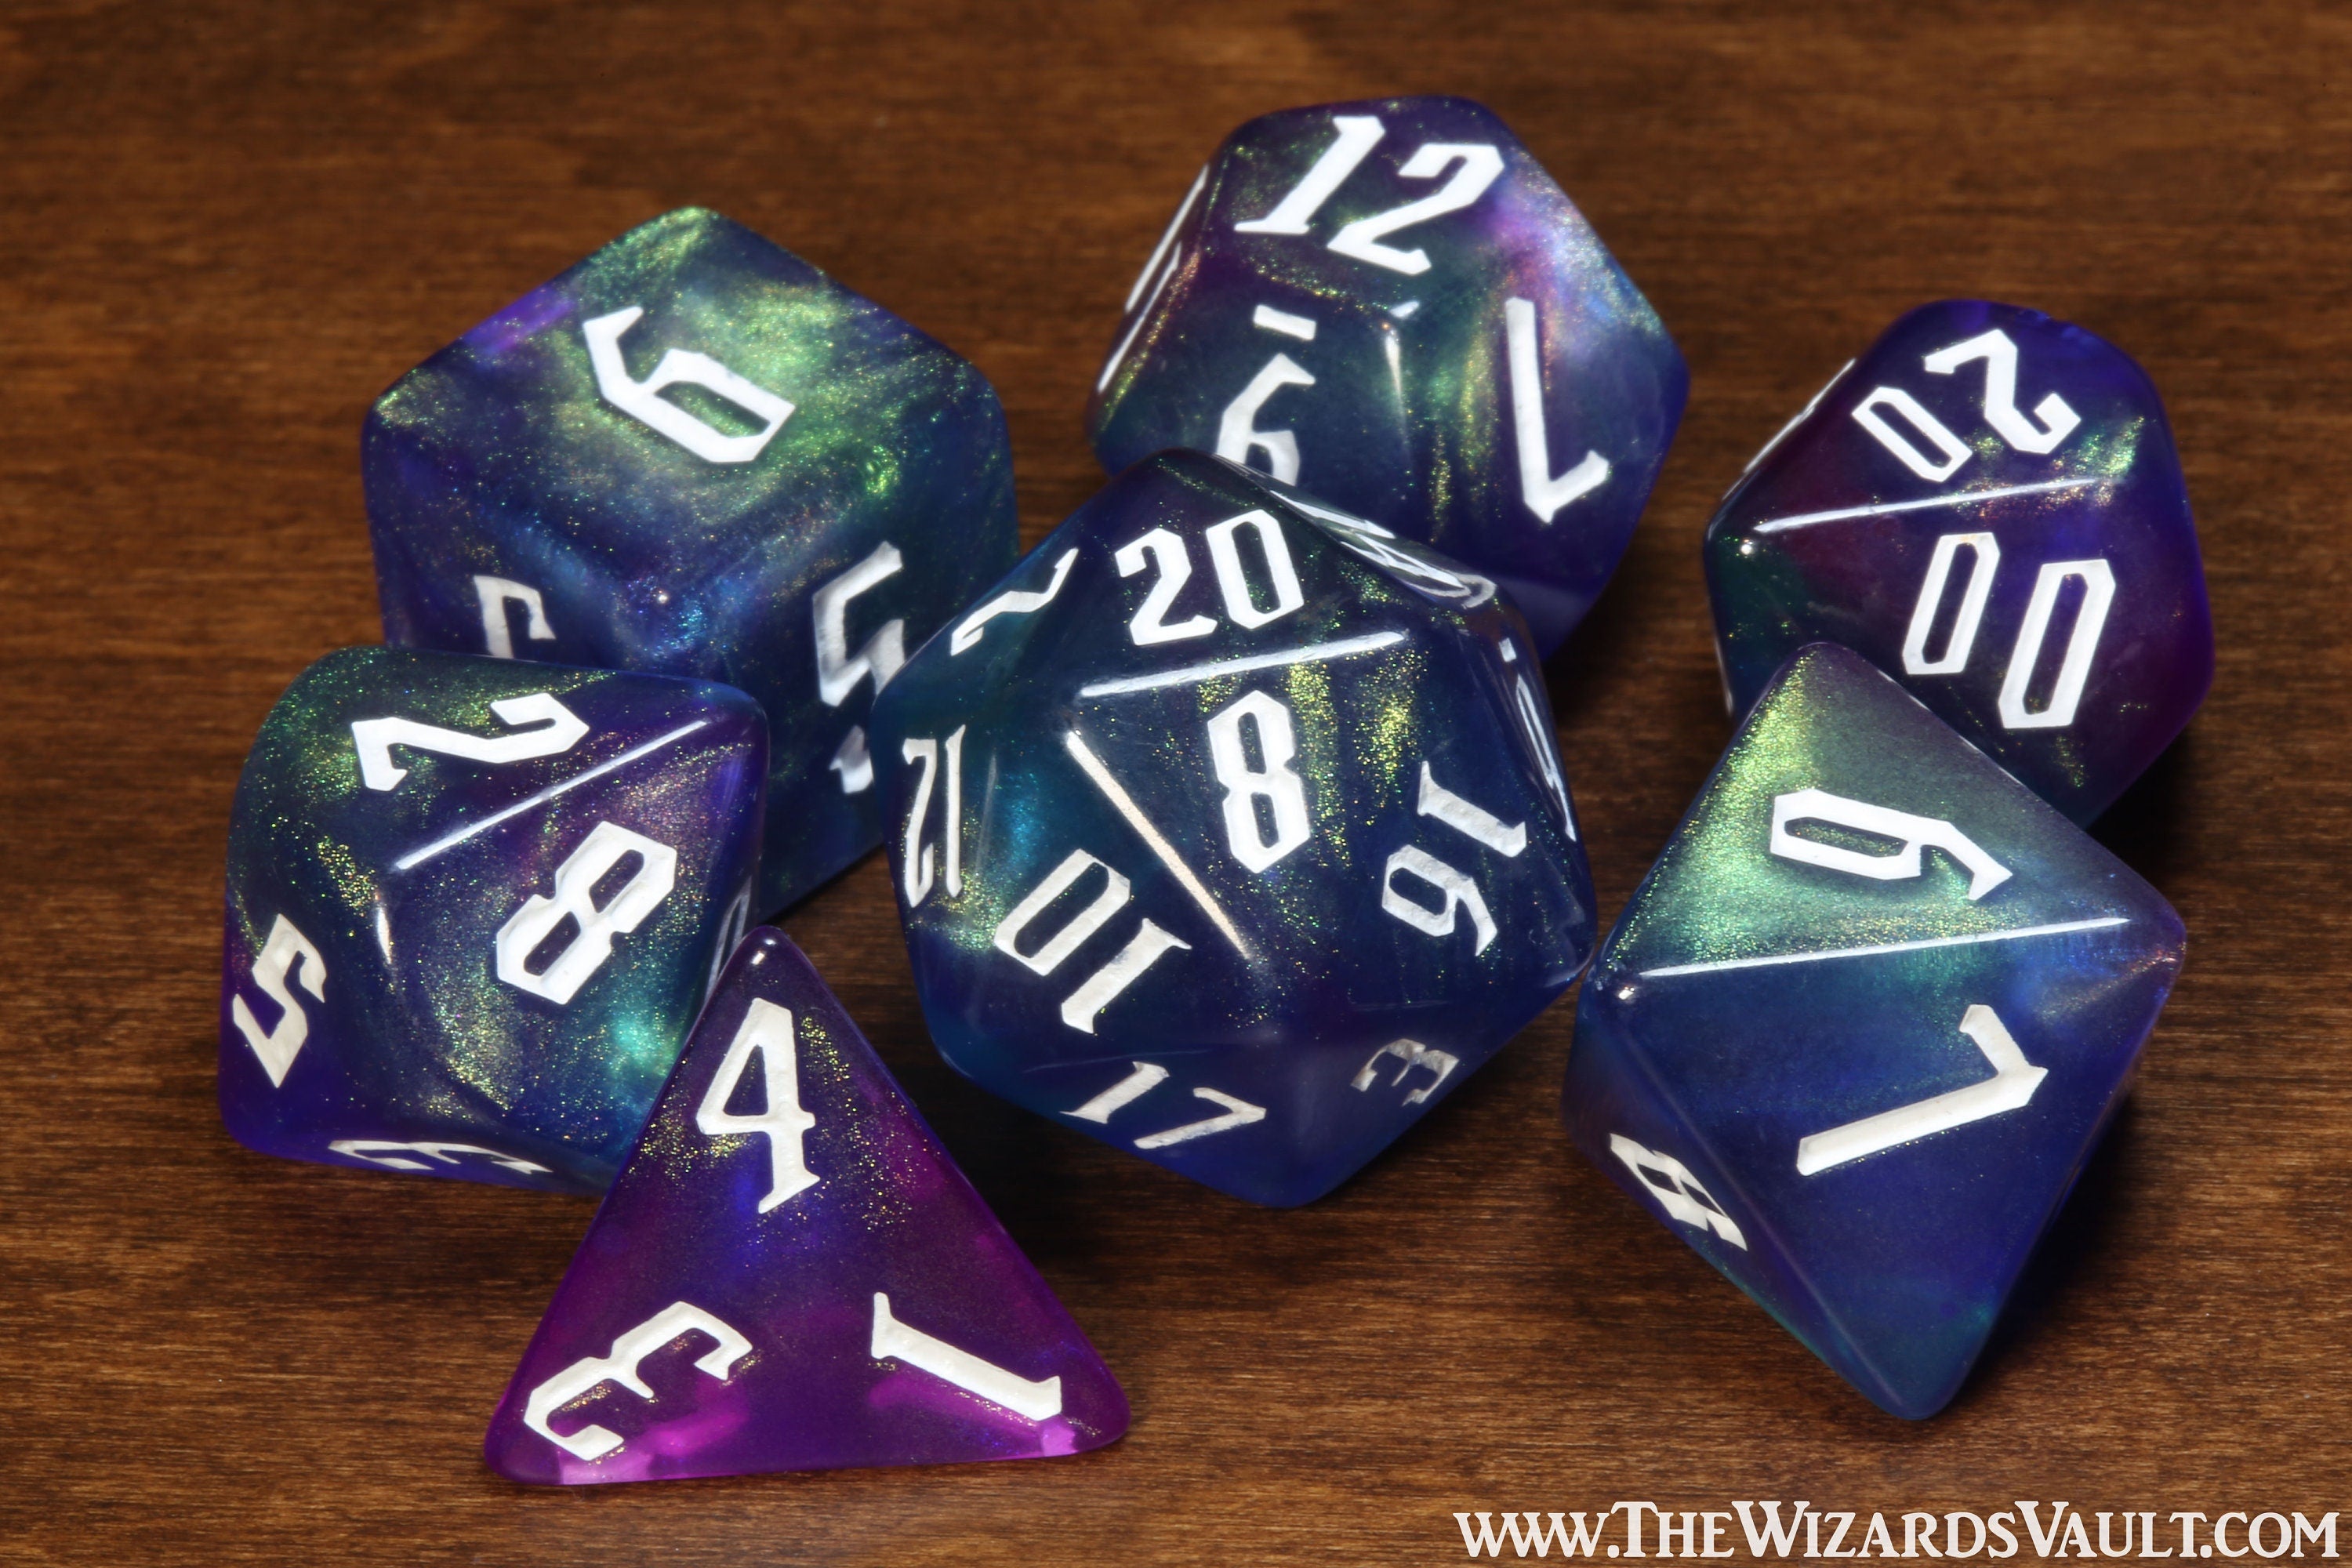 Northern lights - Purple blue green DND Dice, Translucent with glitters,Polyhedral dice set for Dungeons and Dragons, RPG,Role Playing games - The Wizard's Vault